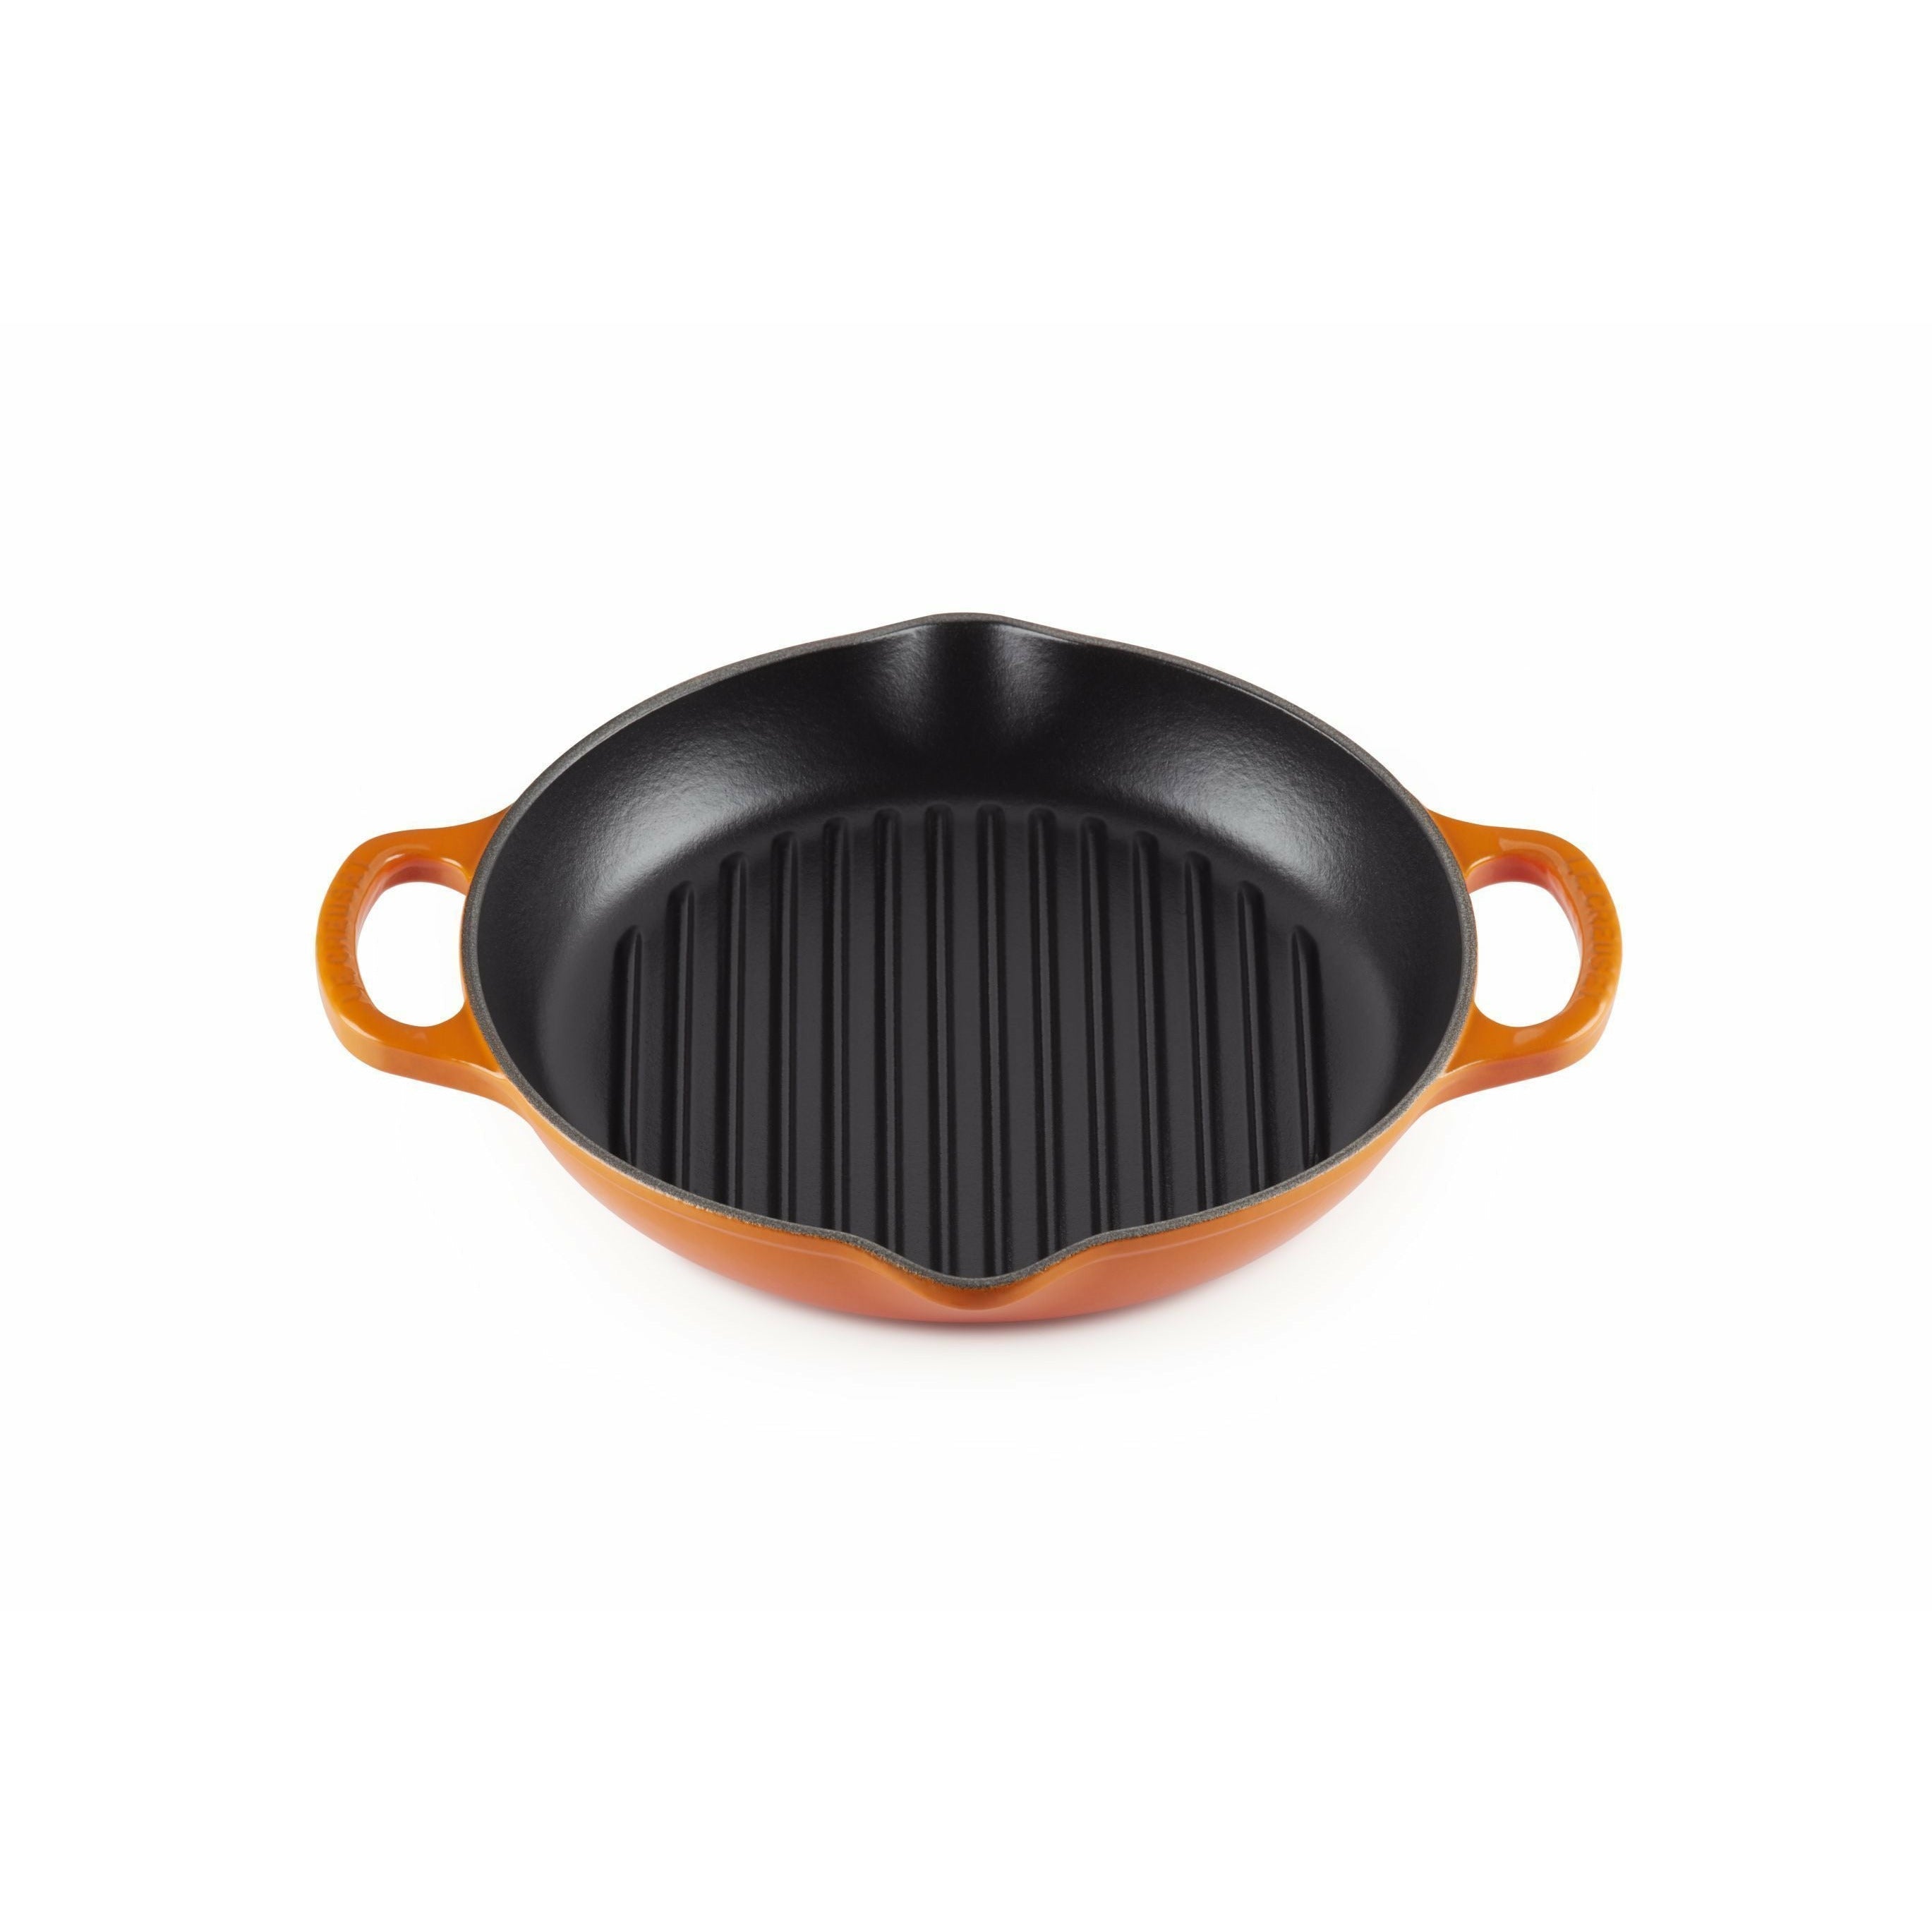 Le Creuset Nature High Round Grill Pan 25厘米，烤箱红色